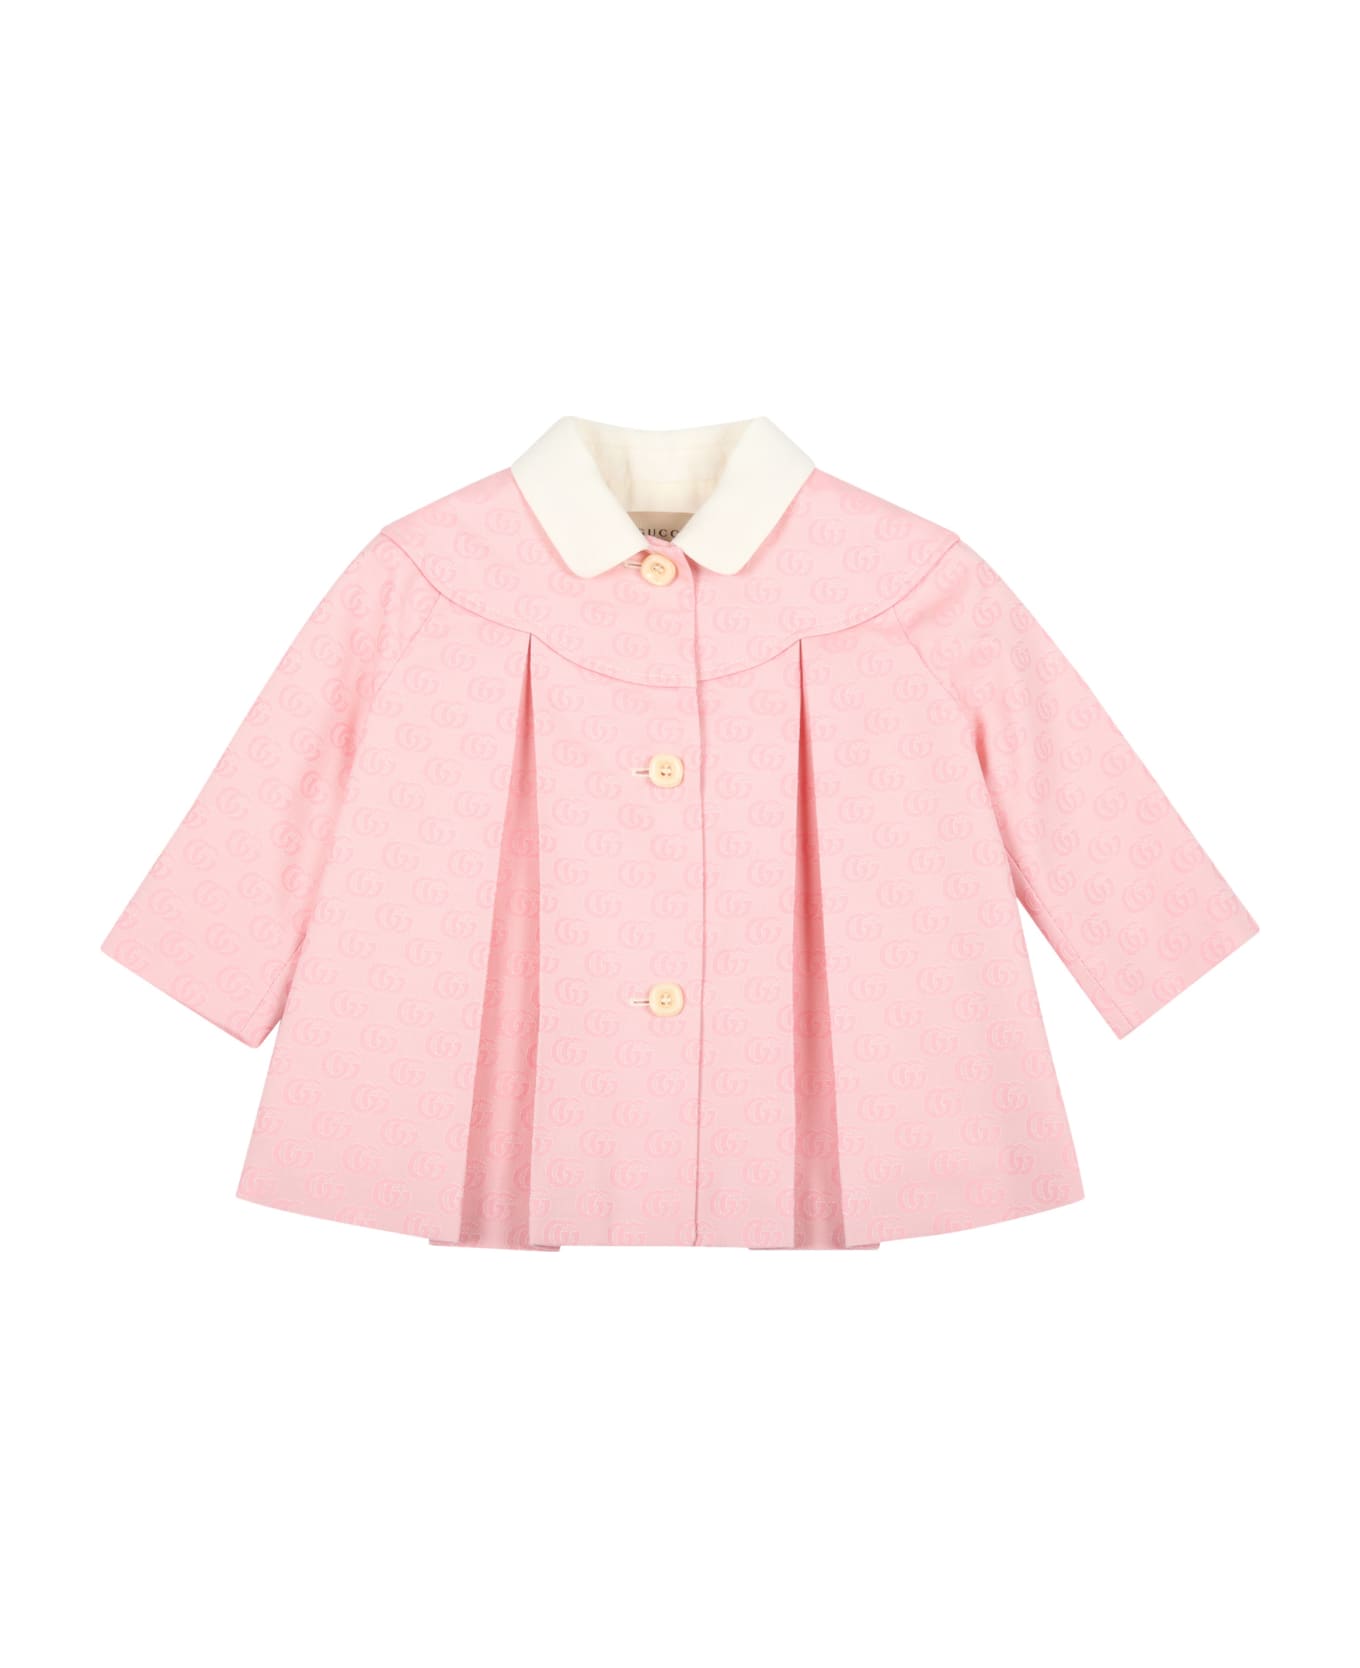 Gucci Pink Coat For Baby Girl With Double Gg - Pink